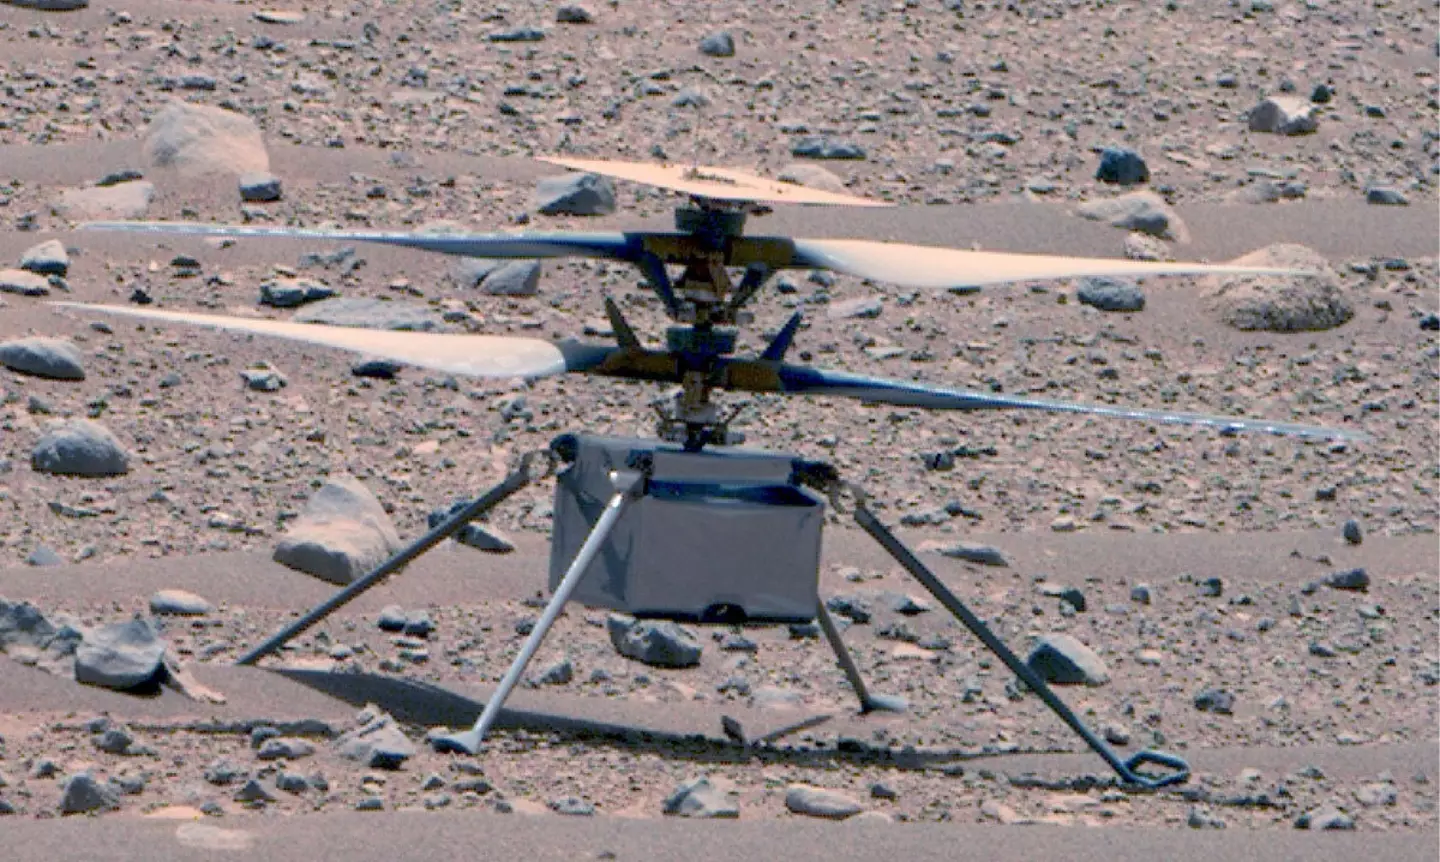 The flying contraption has recently sustained damage and is now grounded on Mars.